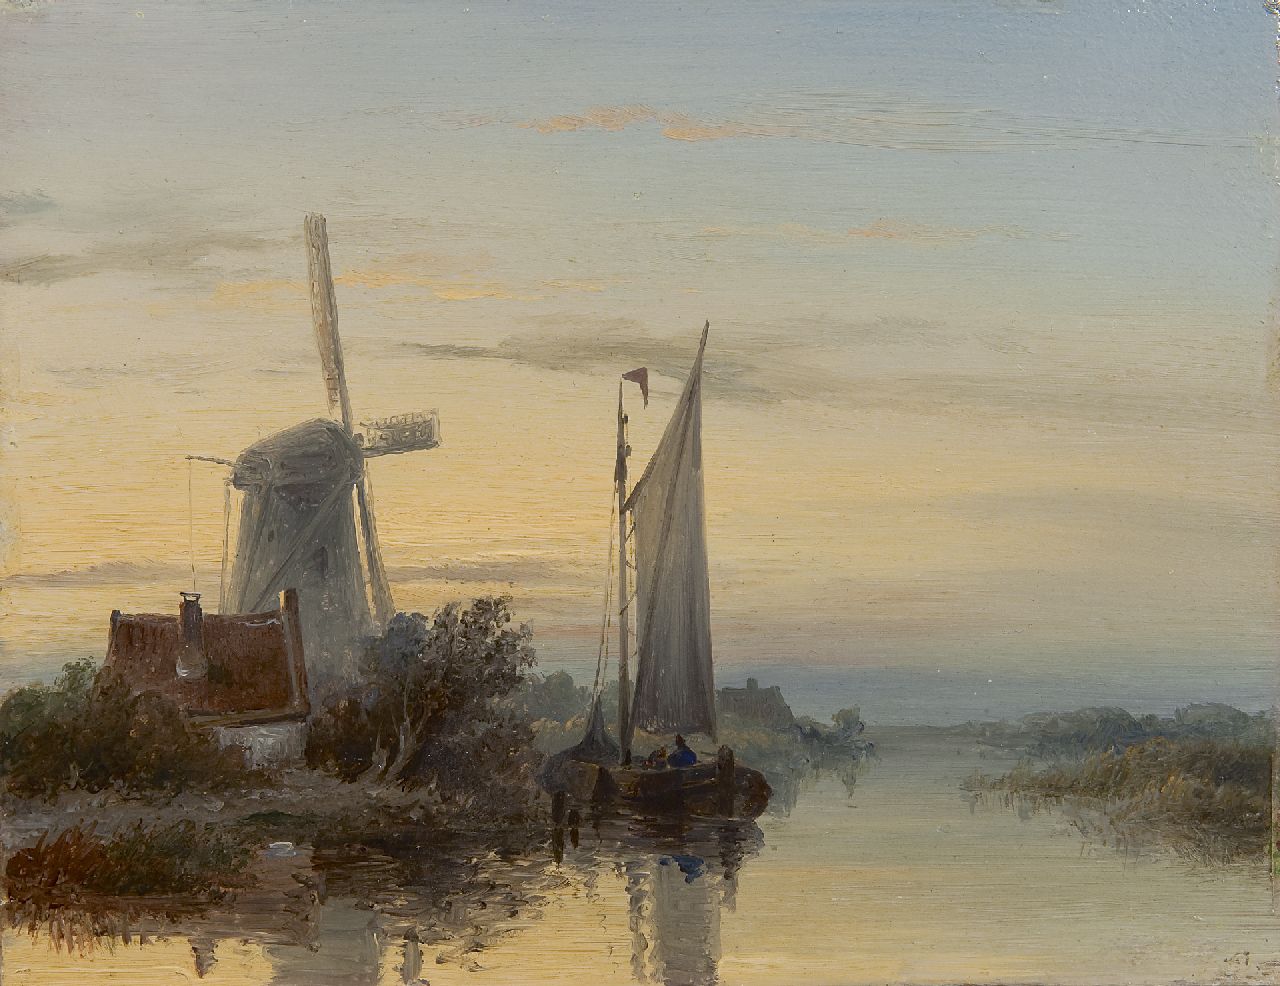 Hilverdink J.  | Johannes Hilverdink, Moored boats near a mill, oil on panel 17.3 x 22.2 cm, signed l.r. remains of signature